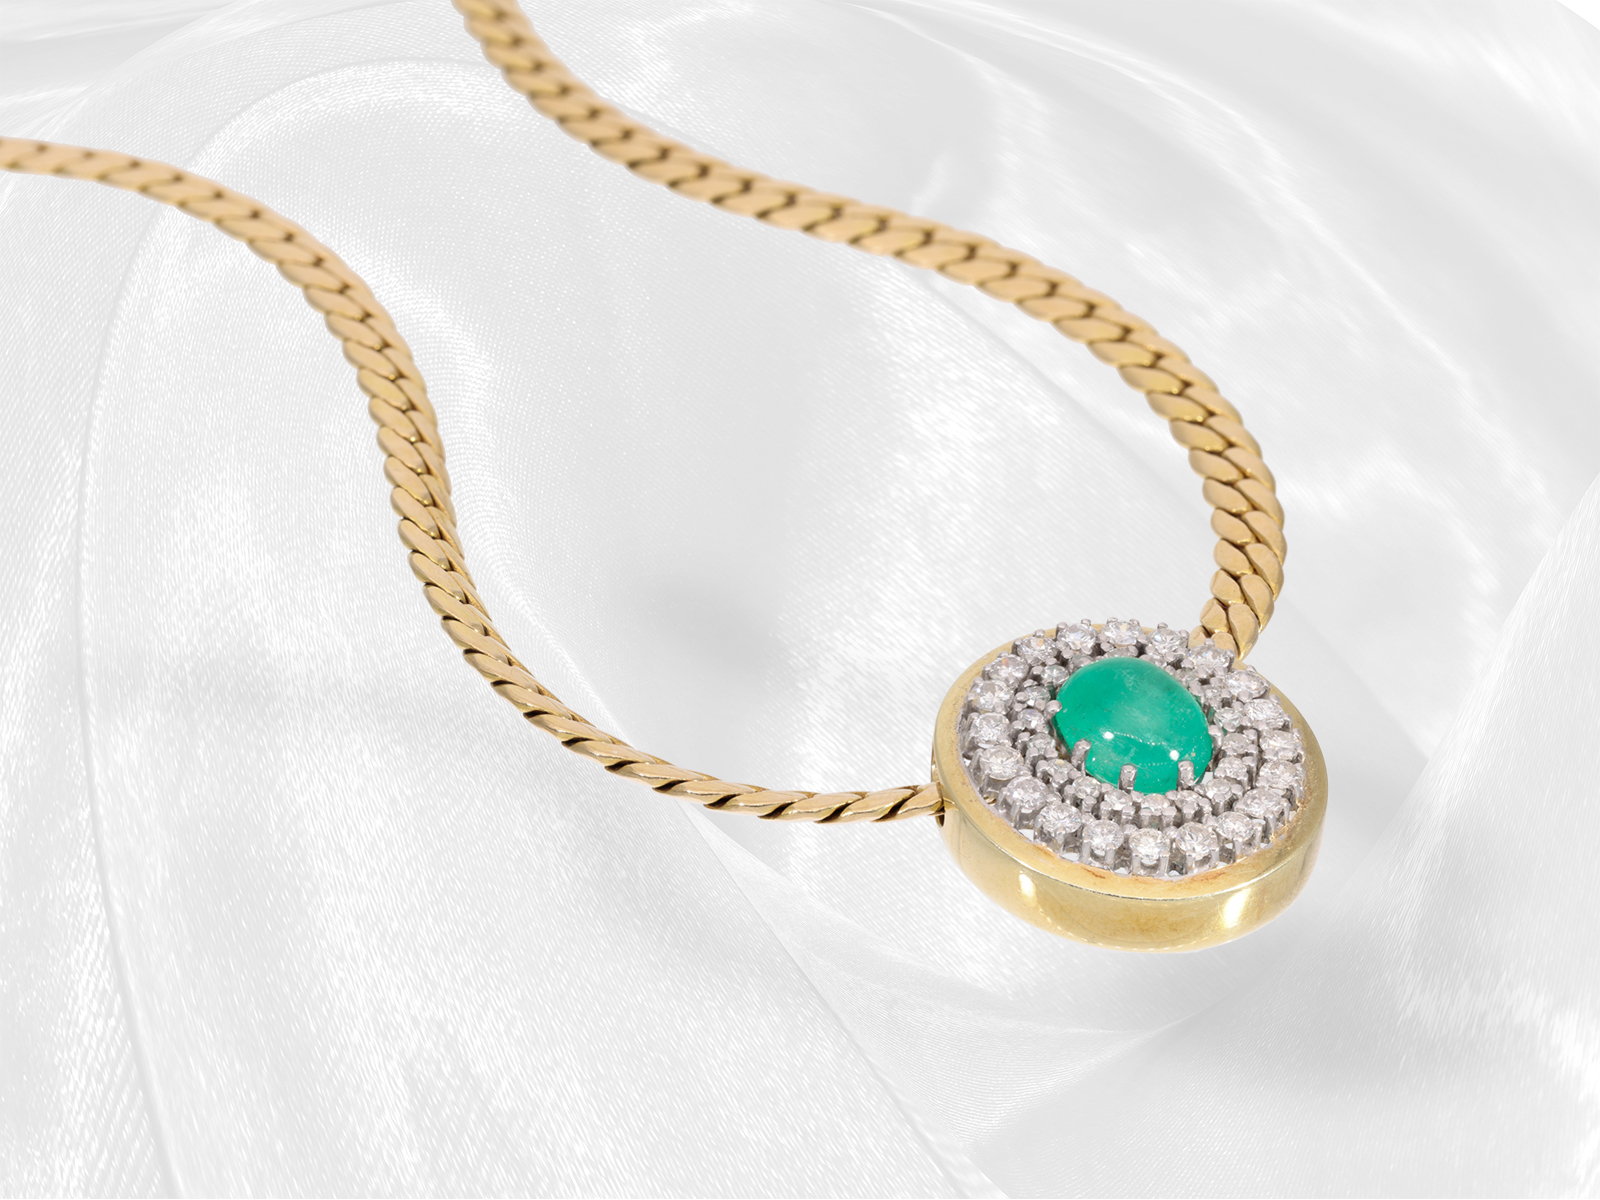 High-quality gold necklace with large emerald/brilliant-cut diamond gold pendant, approx. 6.14ct - Image 3 of 5